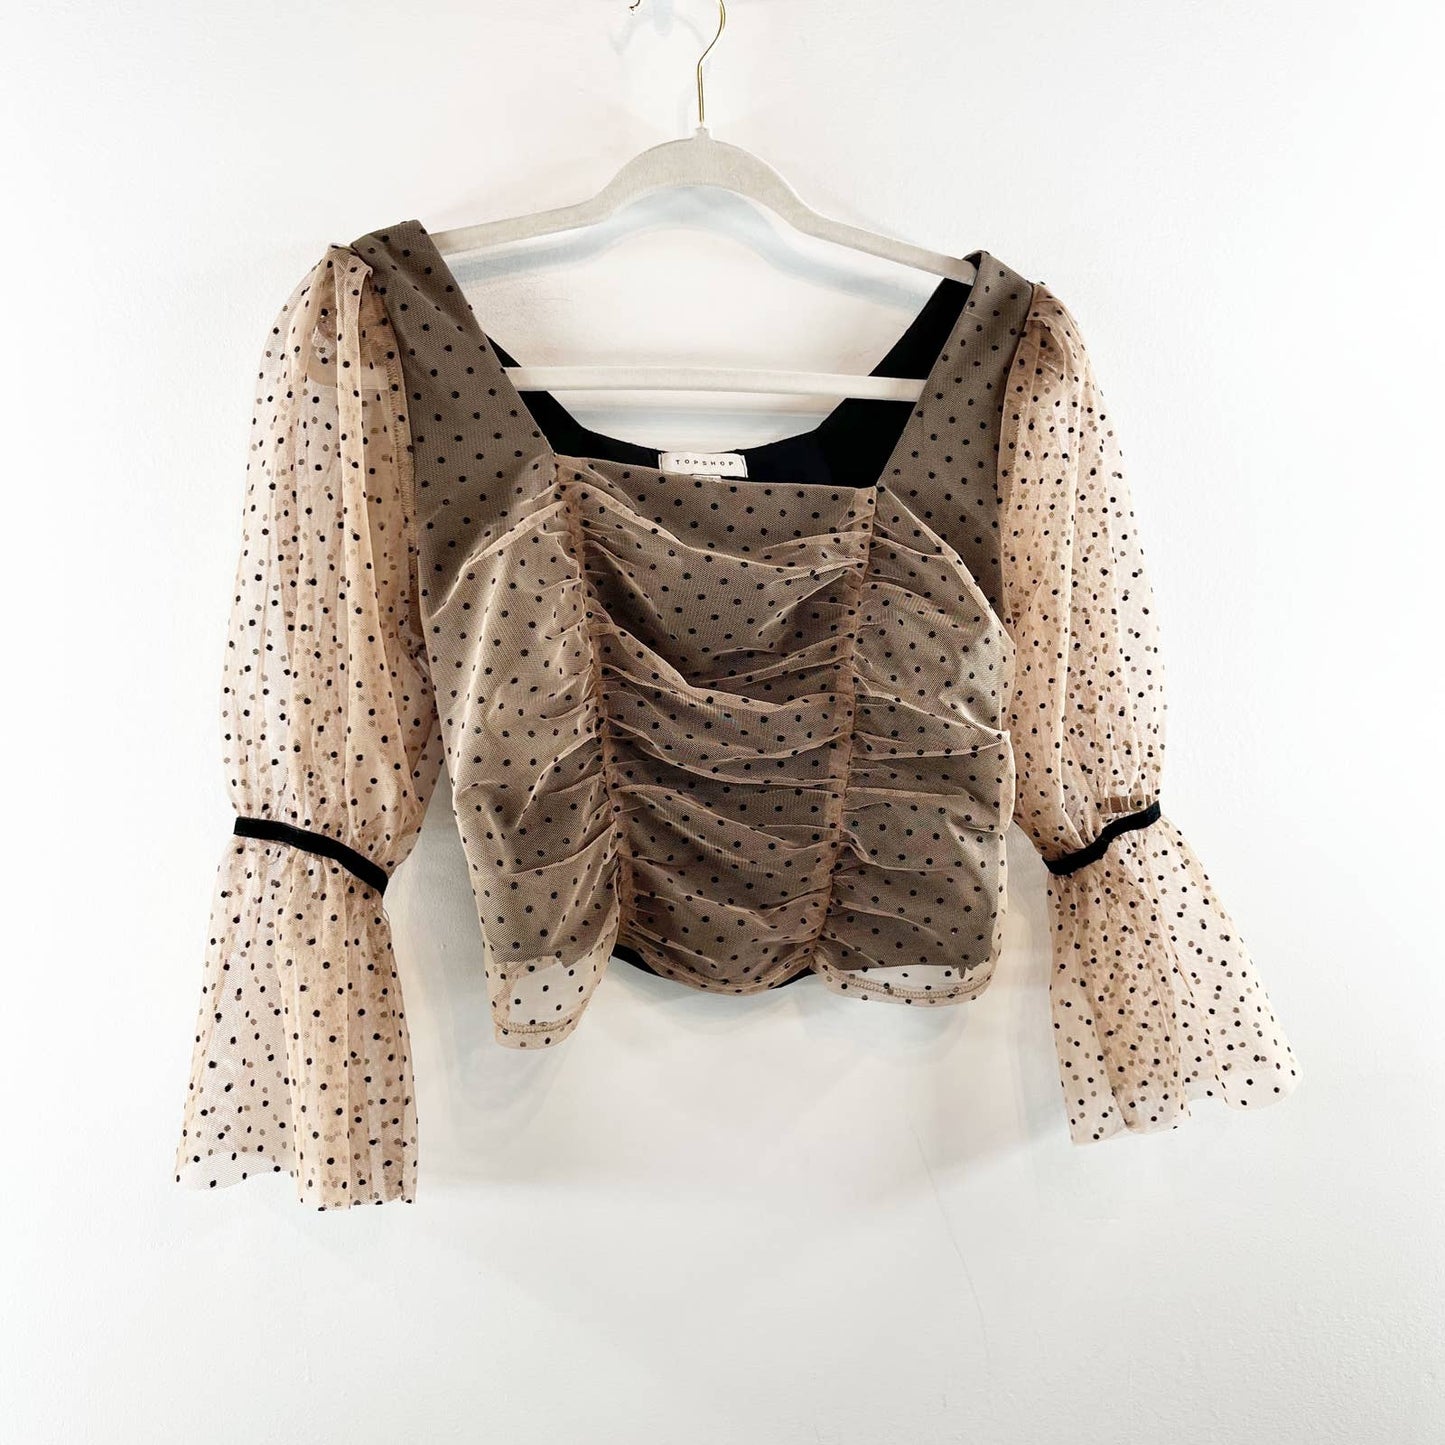 Topshop Polka Dot Puff Sheer Sleeve Square Neck Cropped Blouse Top in Beige 8